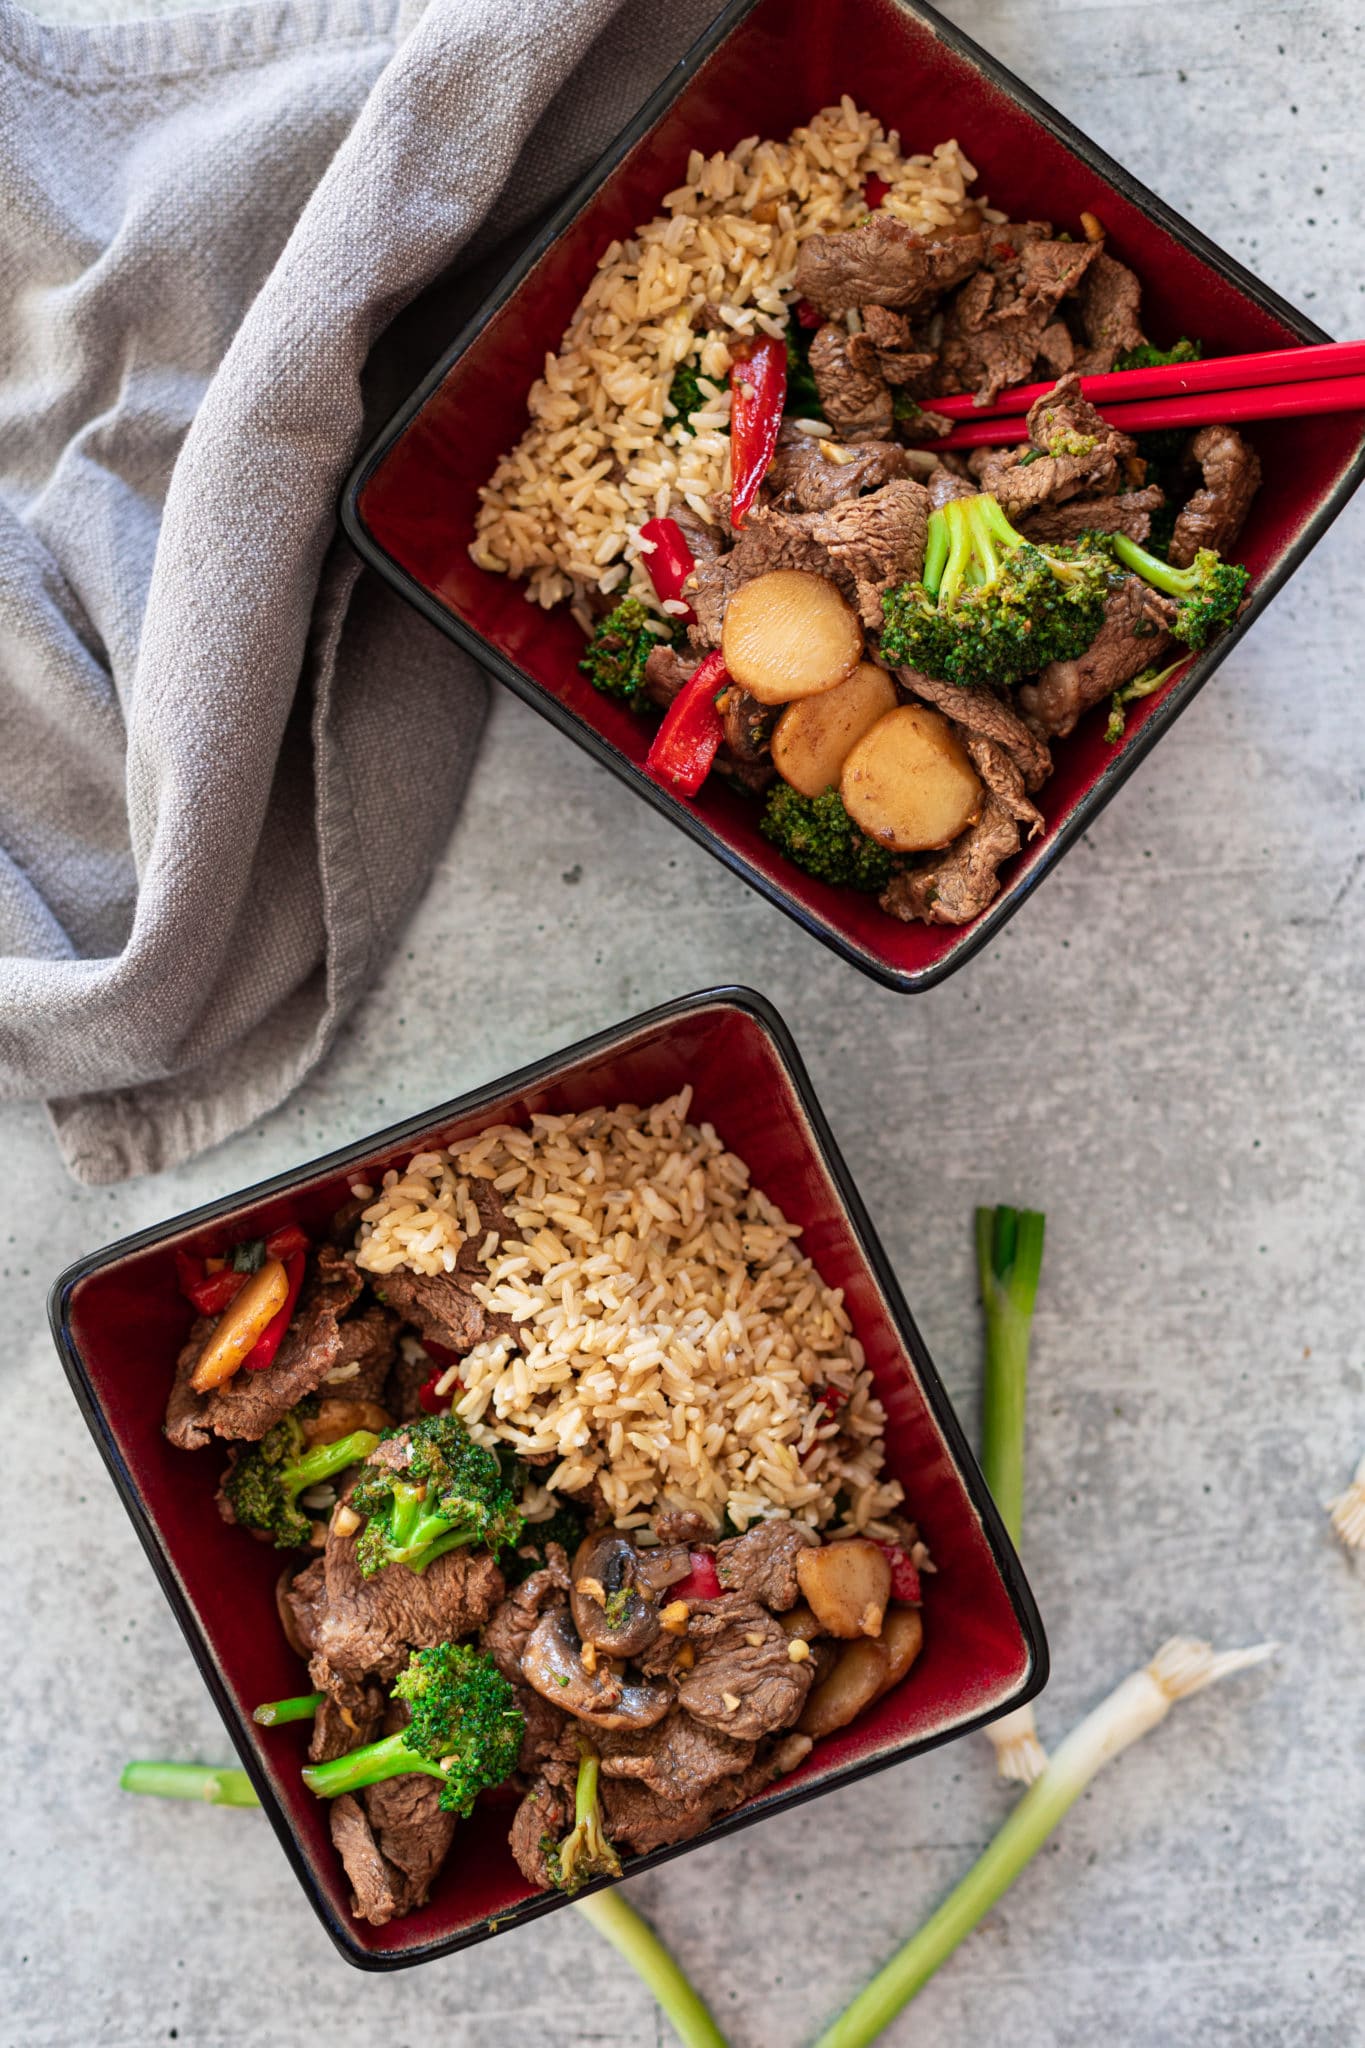 Bowls filled with rice and beef stir fry.